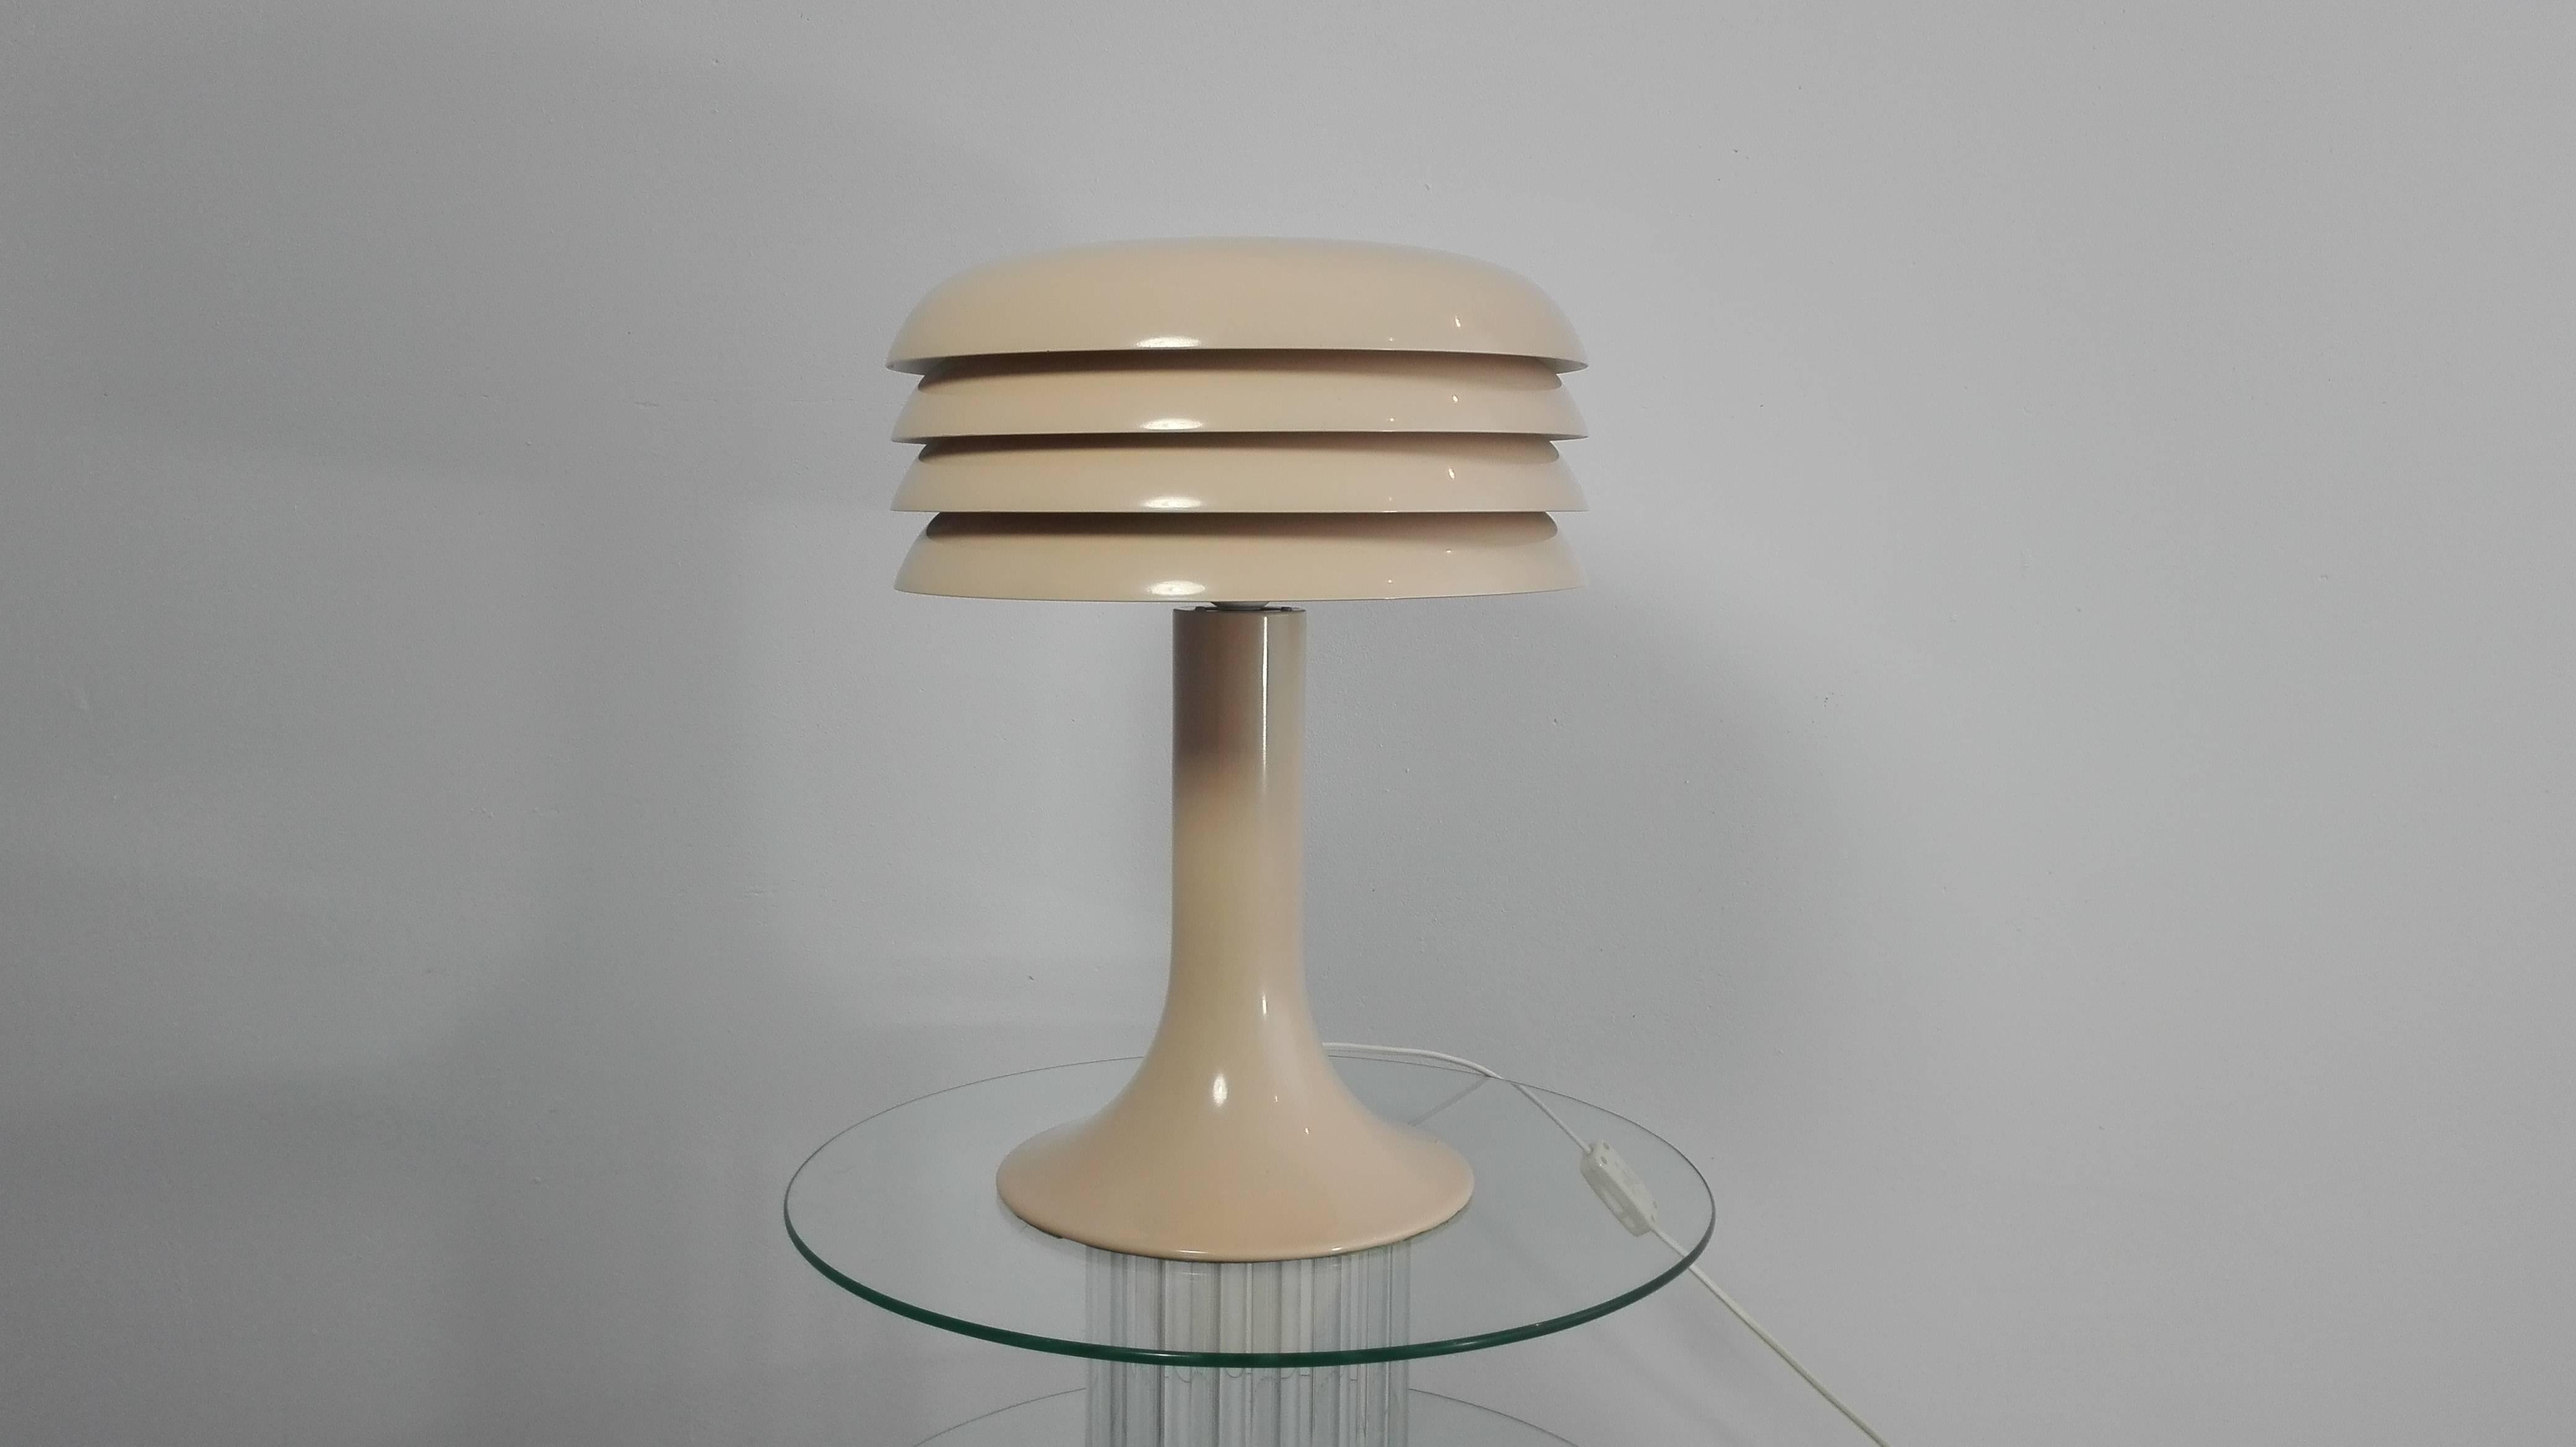 This 'BN 26' metal table lamp by H. A. Jakobsson for AB Markaryd is produced in Sweden during the 1960s. It is from the Lamingo series.
Marked with sticker.